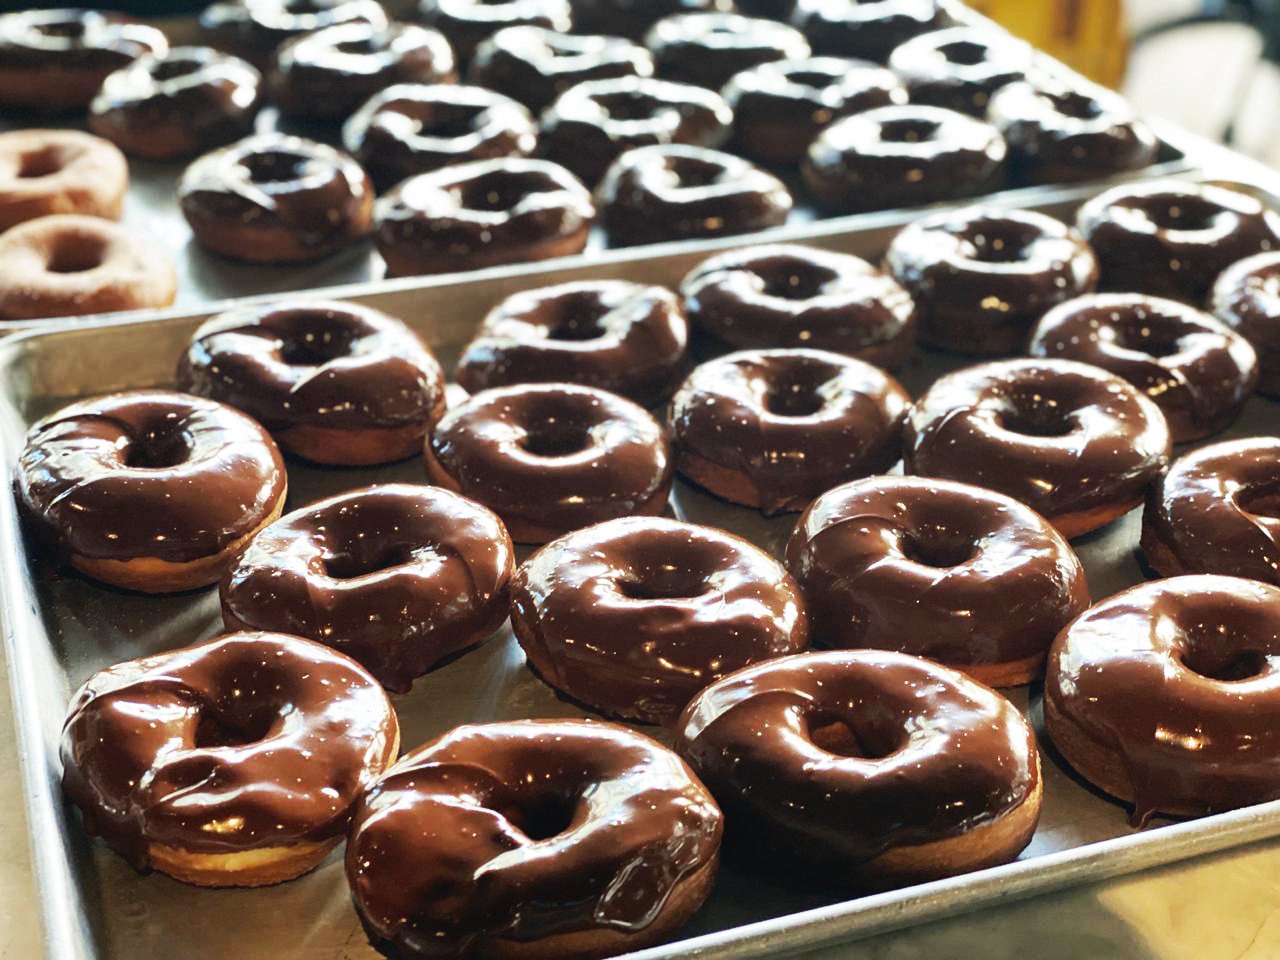 Tray of Chocolate Donuts with Chocolate Frosting dessert or pastry